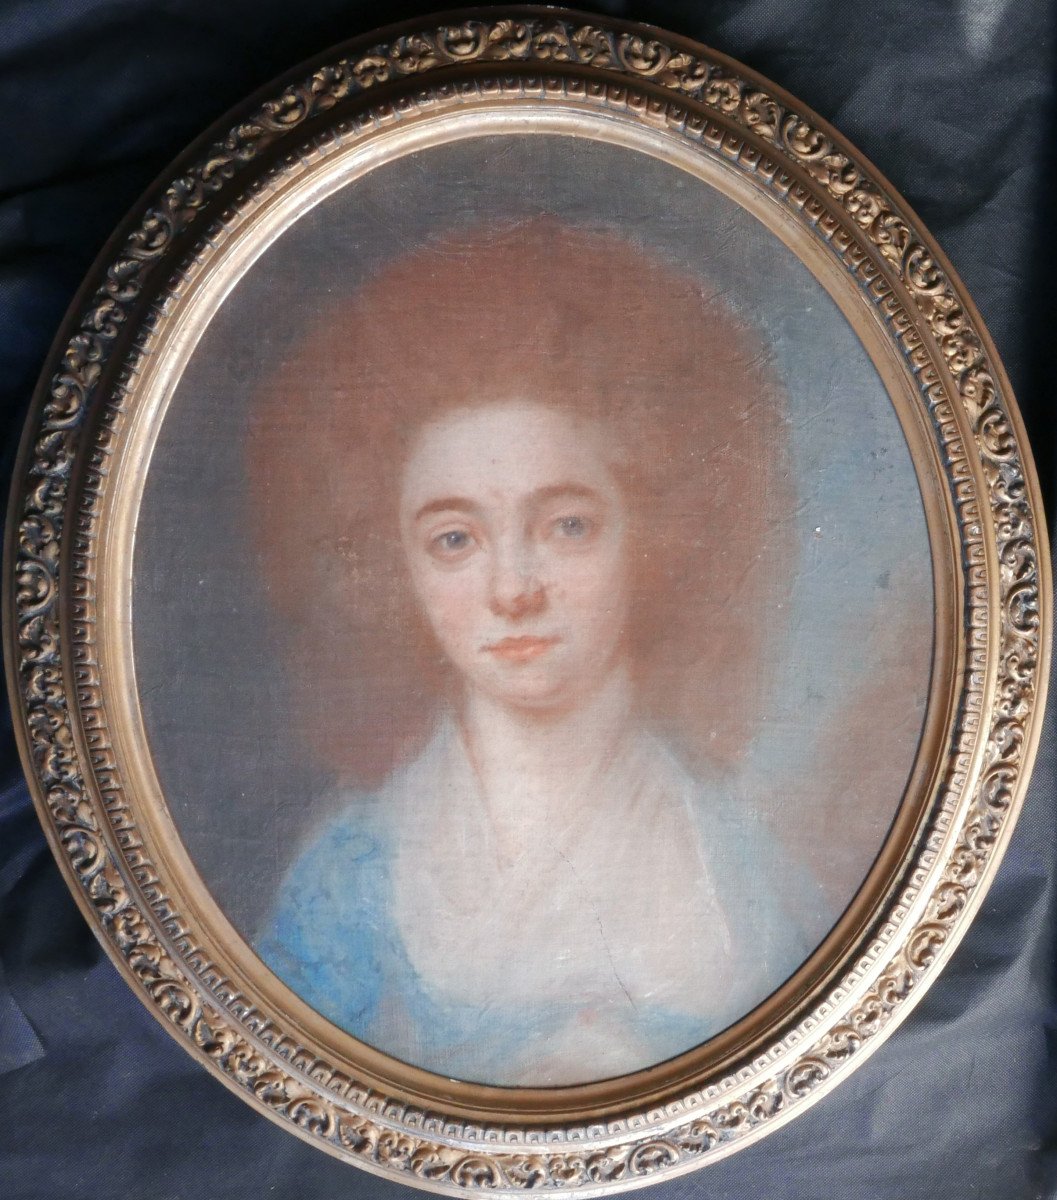 Oval Portrait Of A Woman From The Louis XVI Period Pastel/canvas From The 18th Century